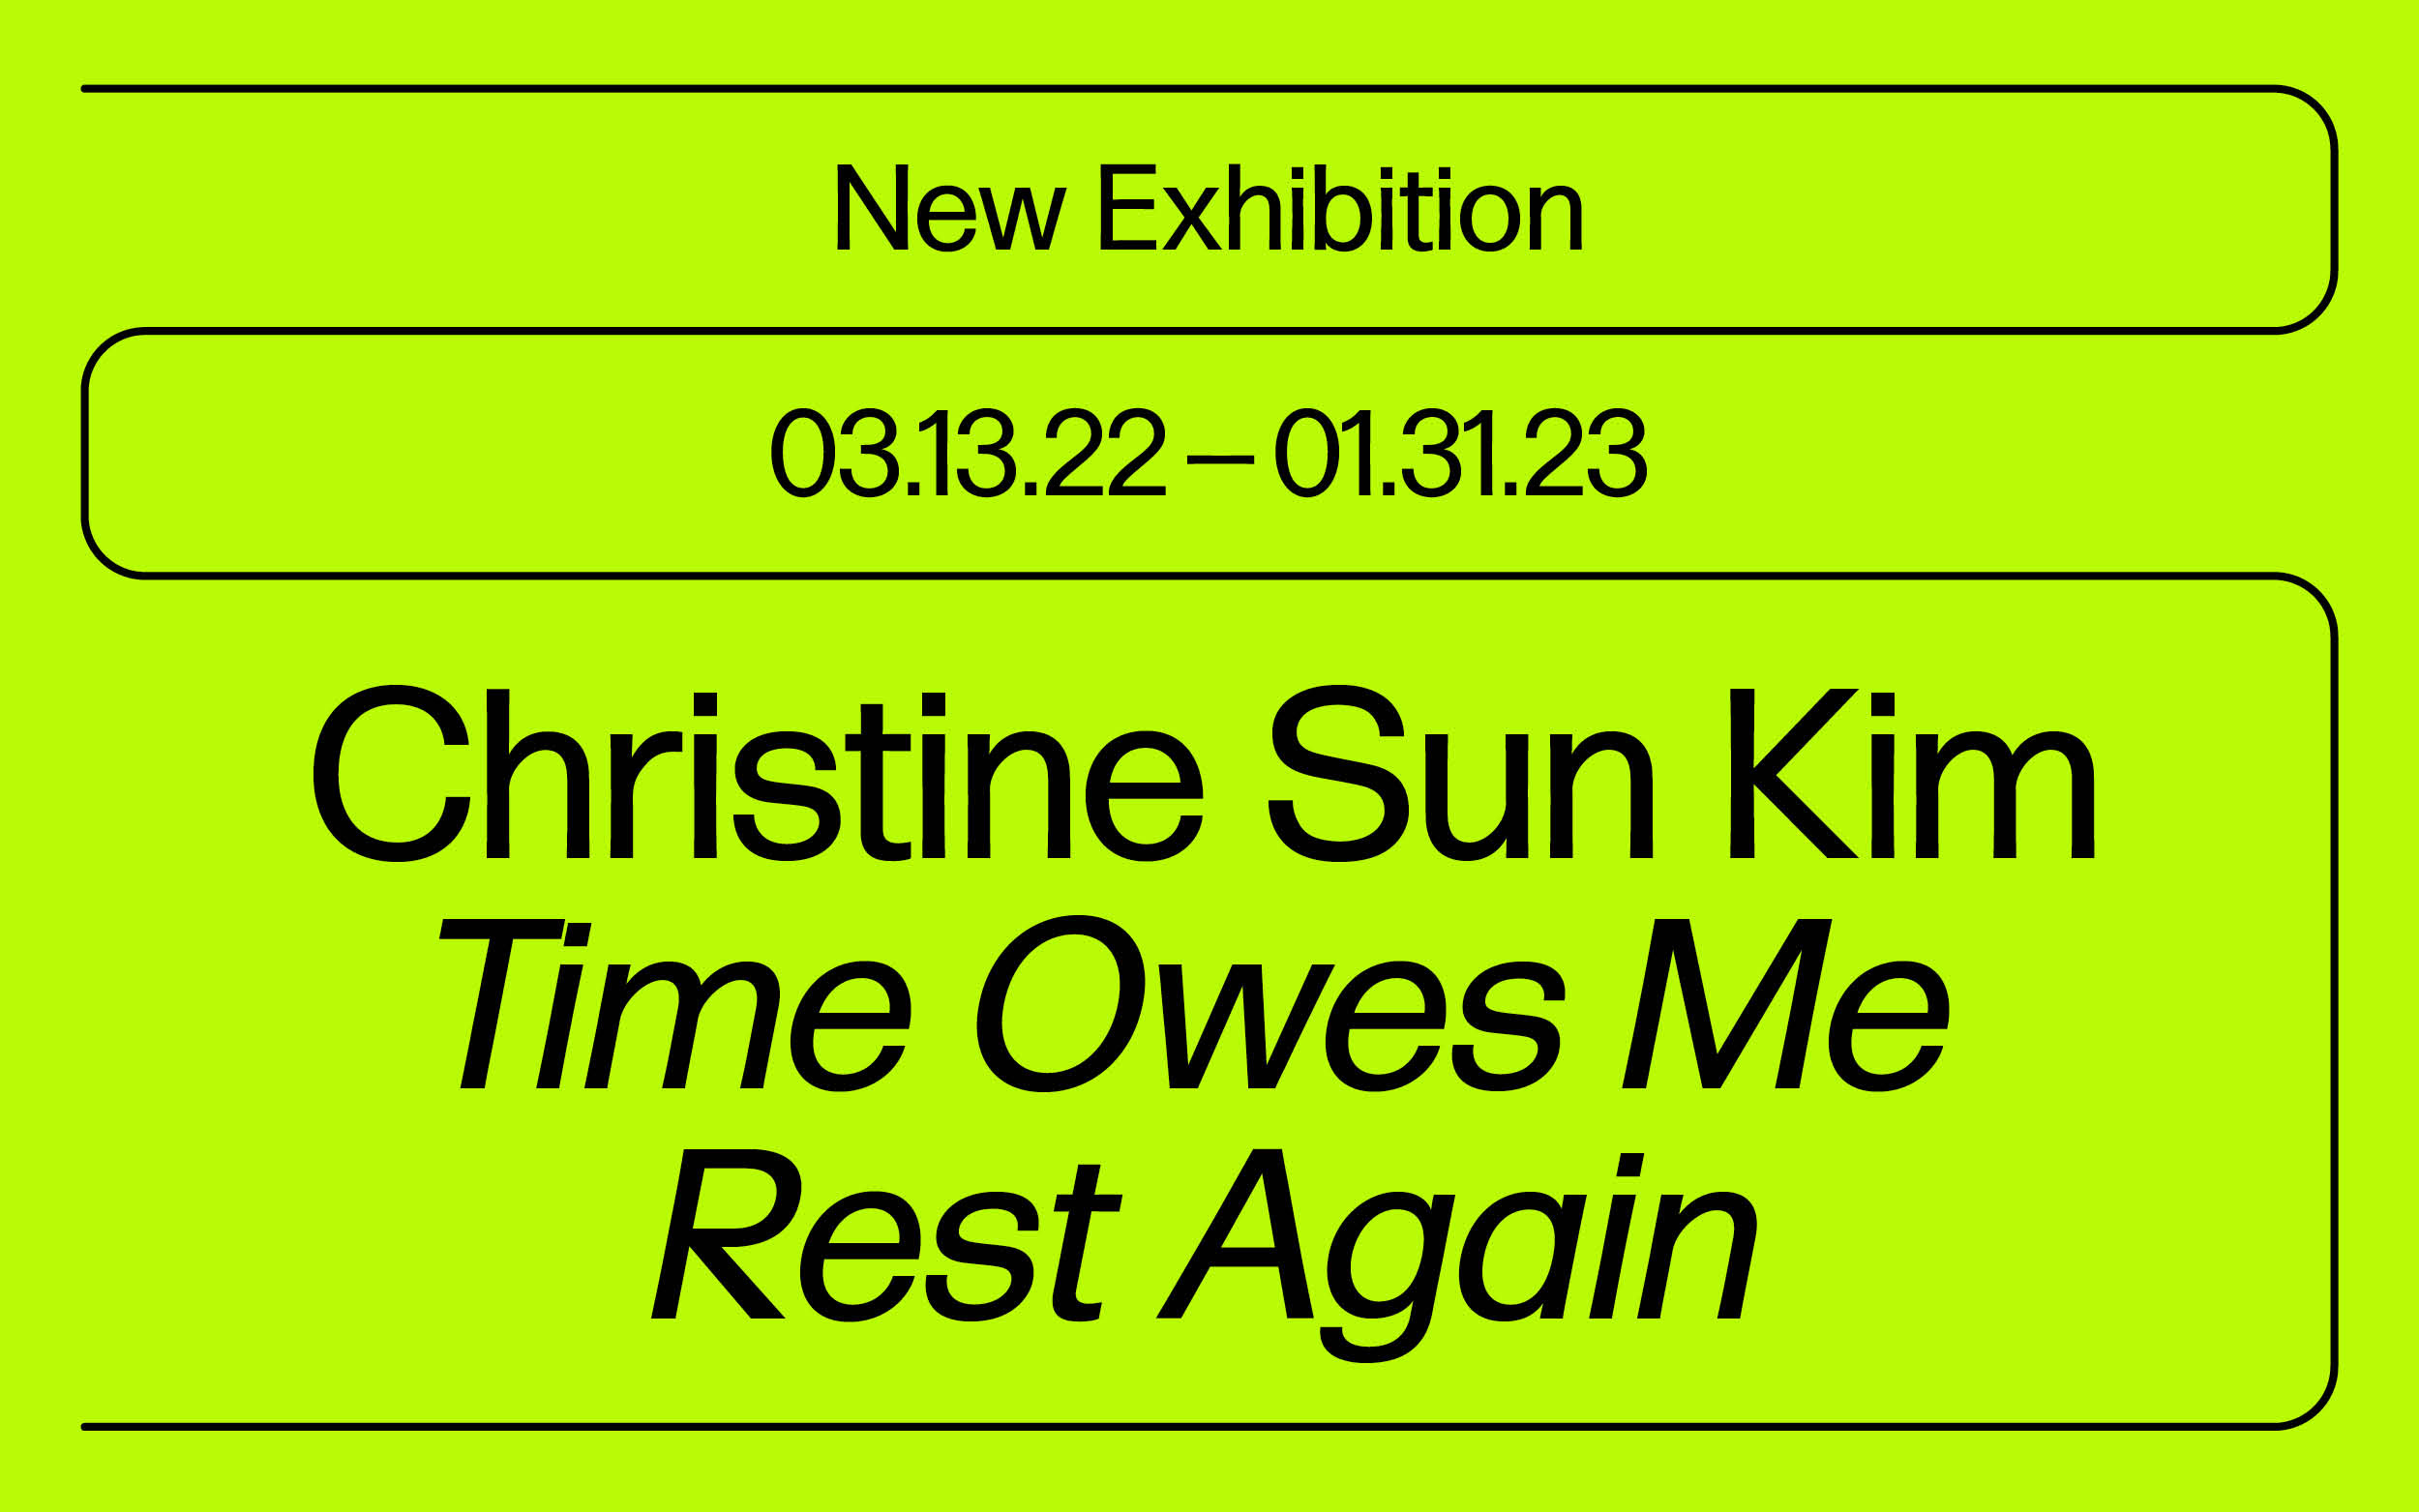 Black text on lime green background that reads "New exhibition, 03.13.22 - 01.31.23, Christine Sun Kim 'Time Owes Me Rest Again'".